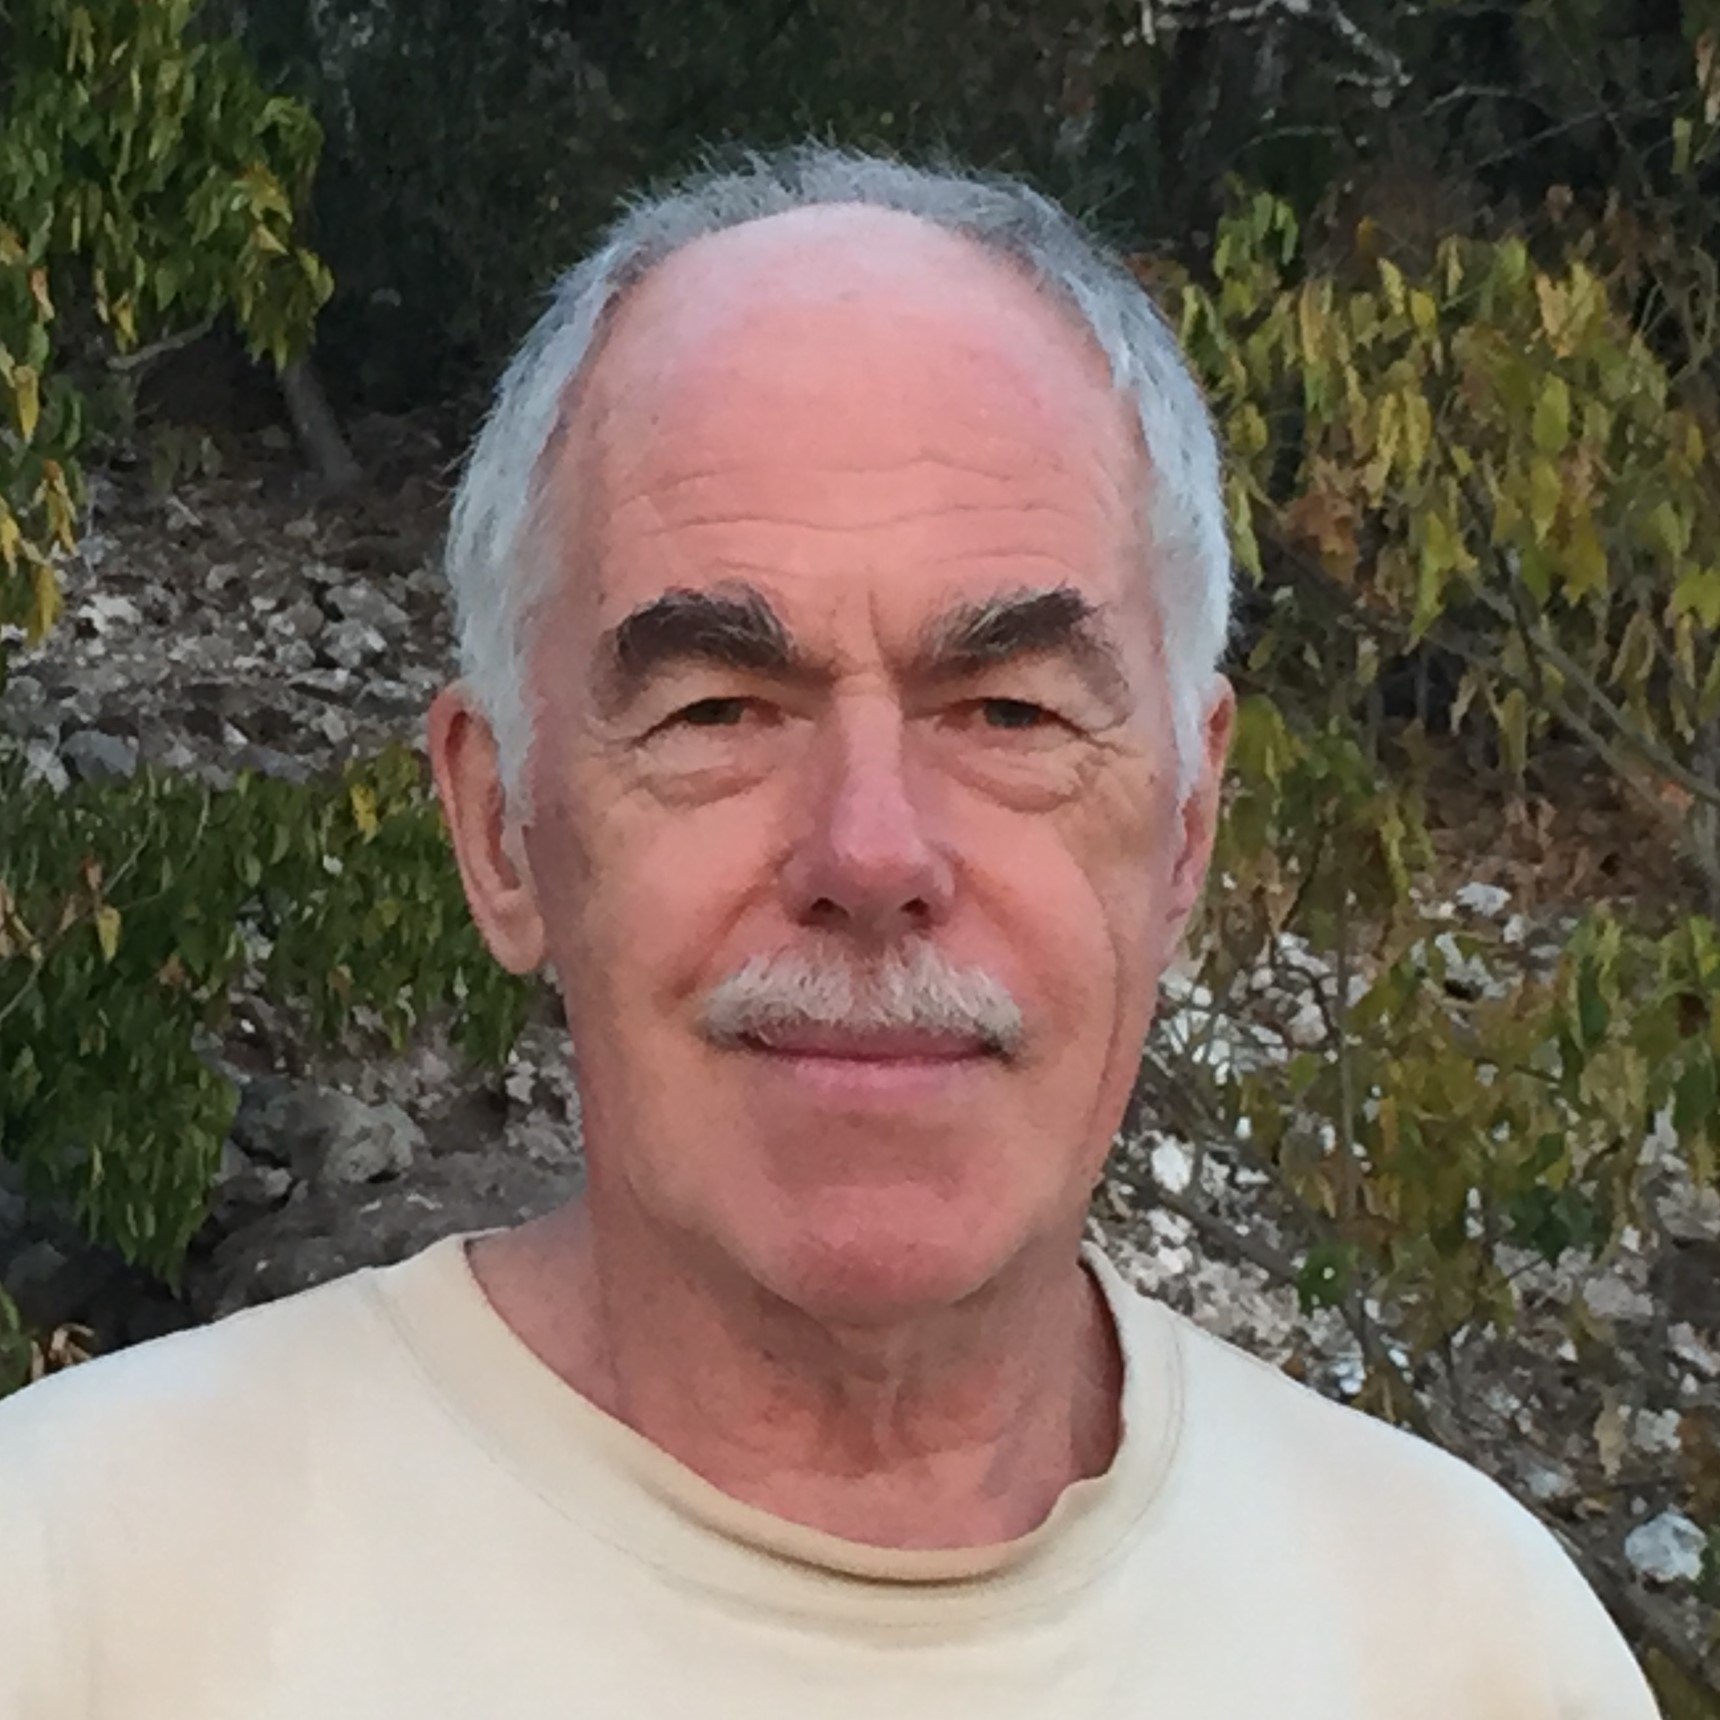 Hugh Drummond with short gray hair and a moustache in a tan t-shirt in front of some trees.